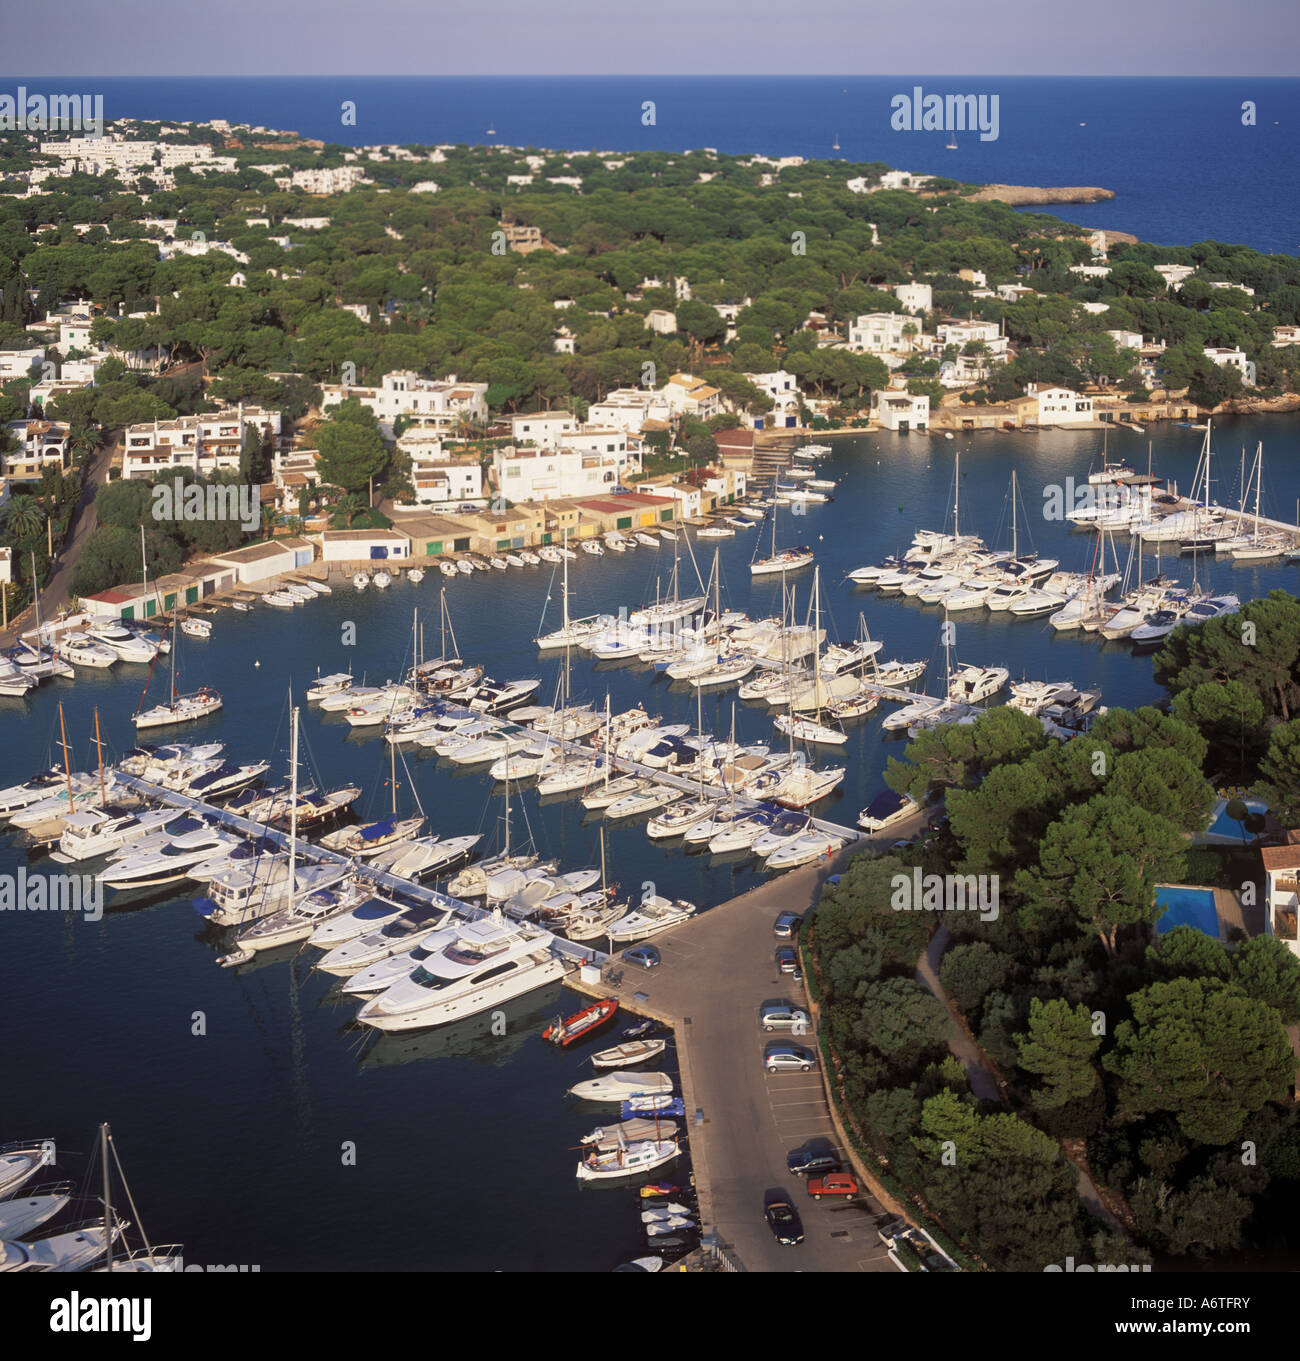 Aerial view looking North East over the marina of Cala D'Or, Santanyi, East Coast Mallorca, Balearic Islands, Spain. 20th Septem Stock Photo